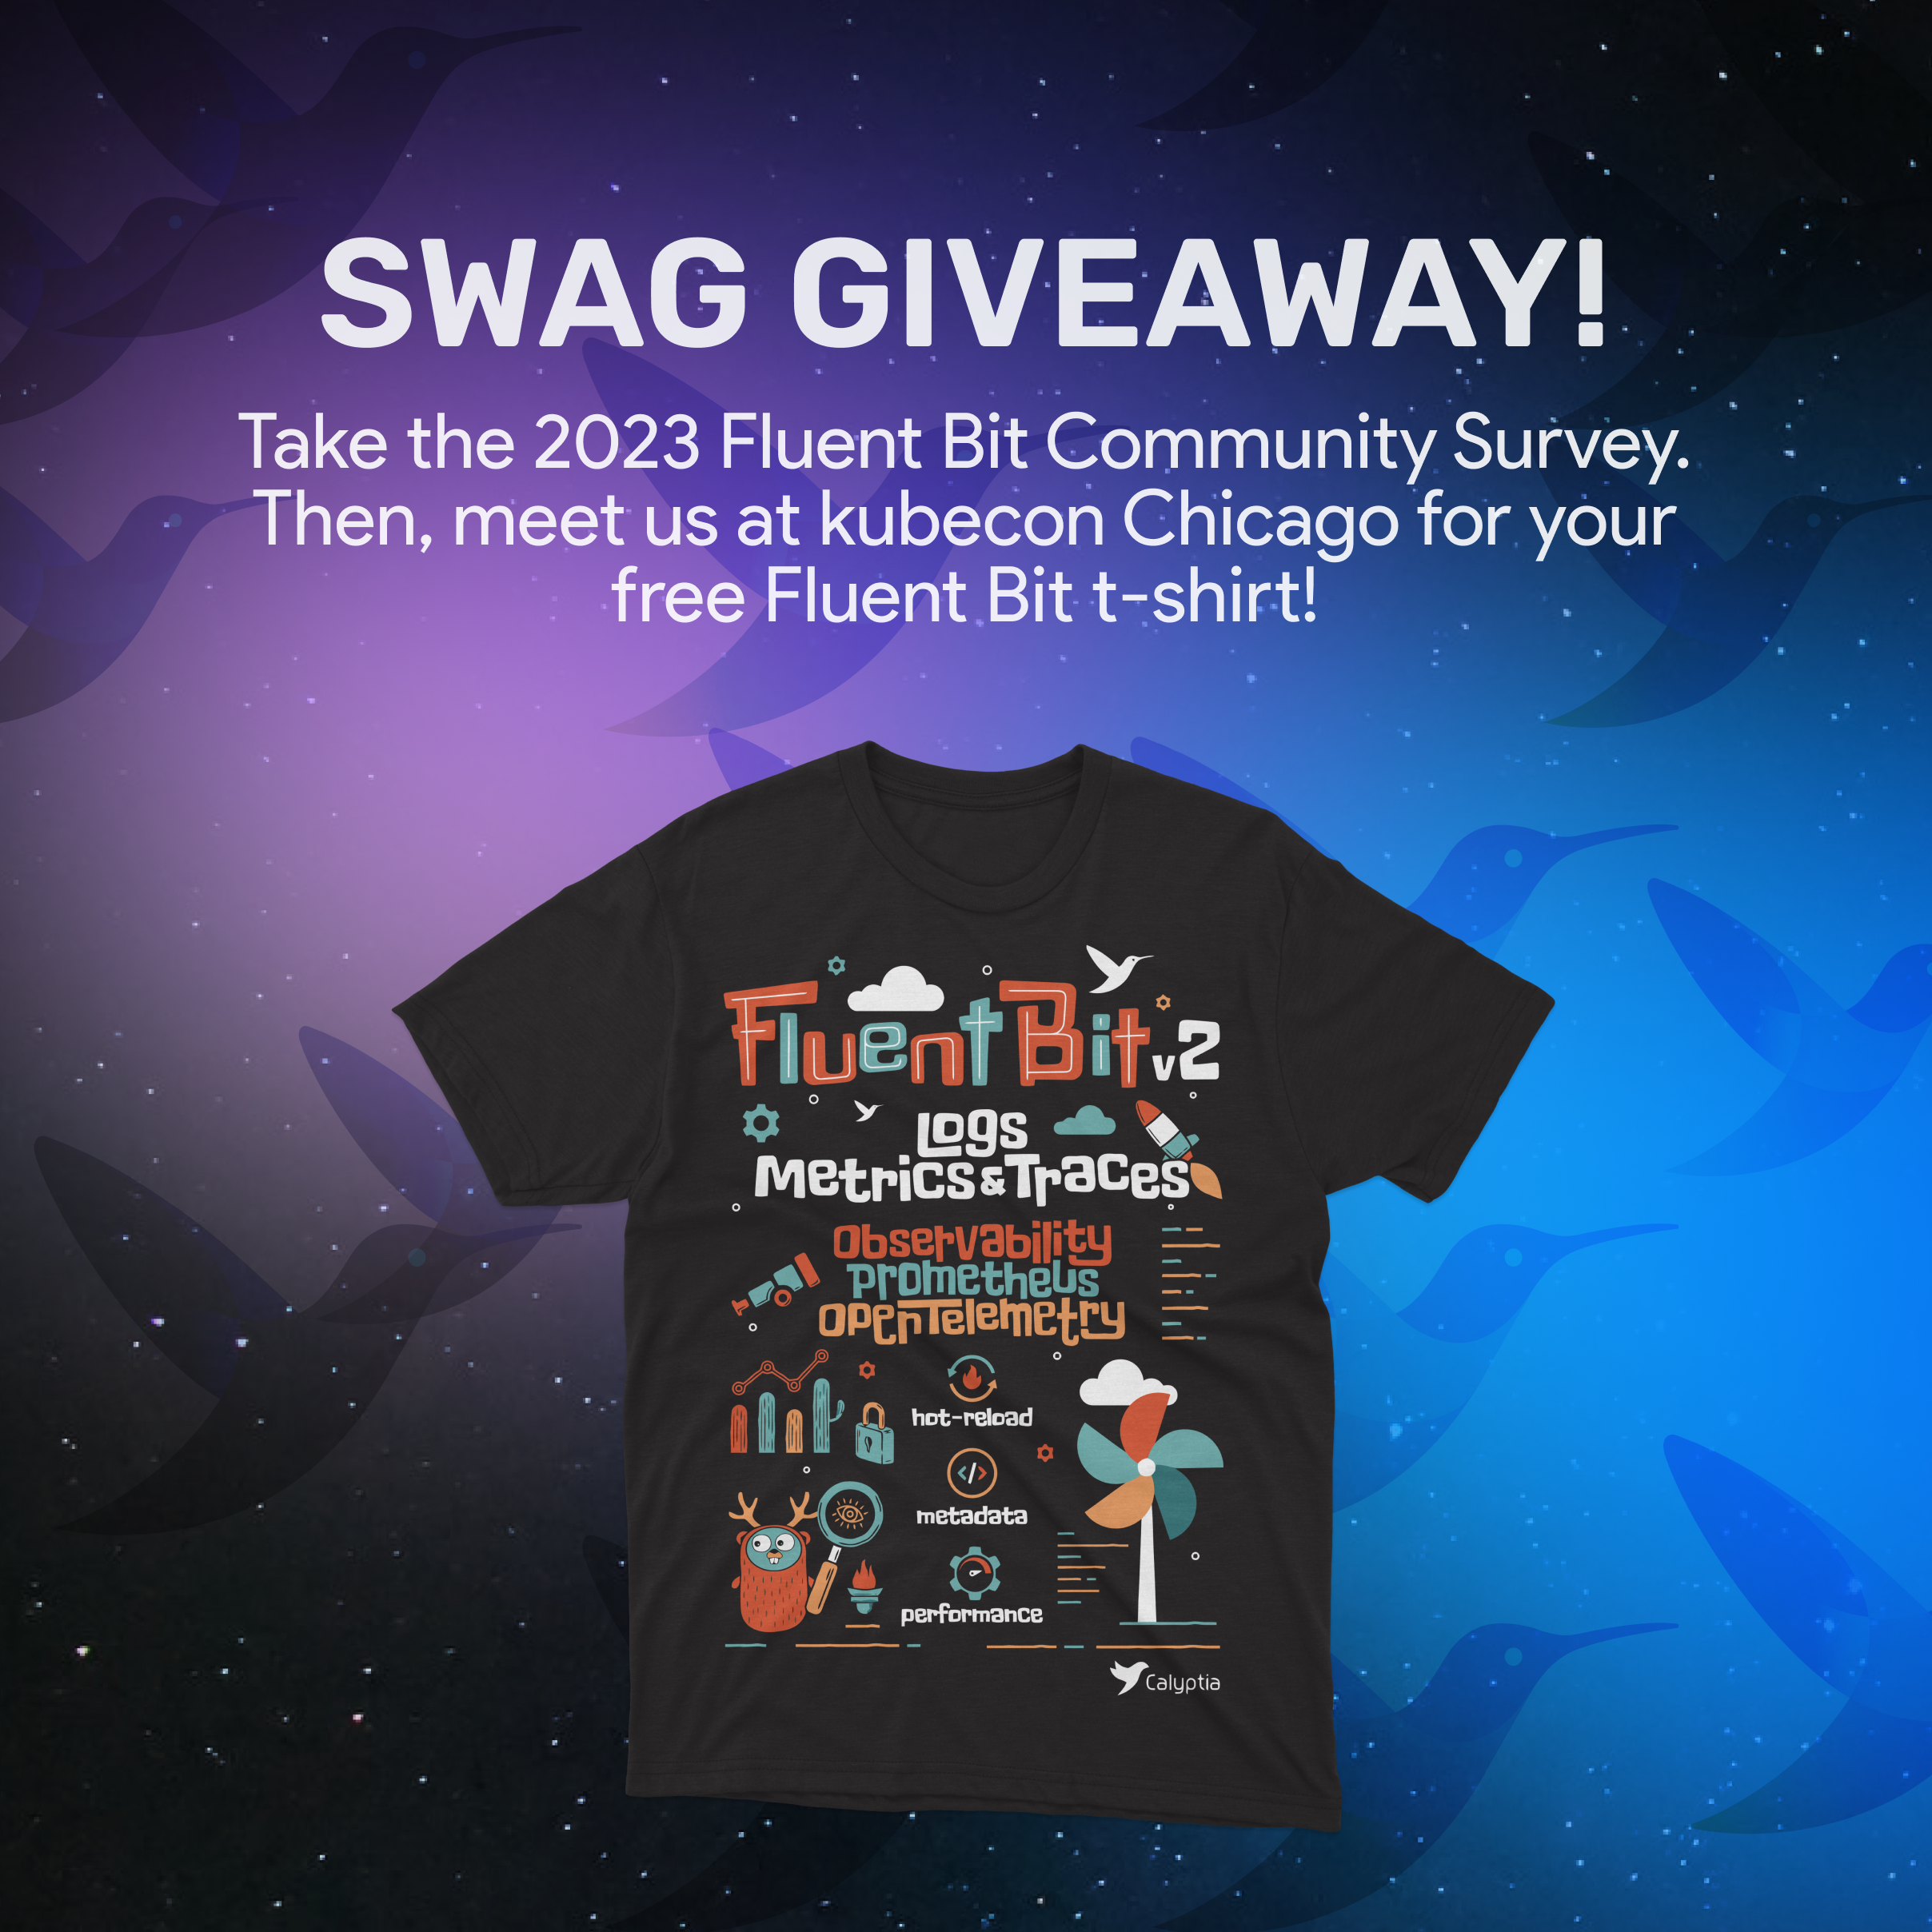 Swag giveaway. Take the 2023 Fluent Bit Community Survey. Then, meet us at KubeCon Chicago for your free Fluent Bit t-short